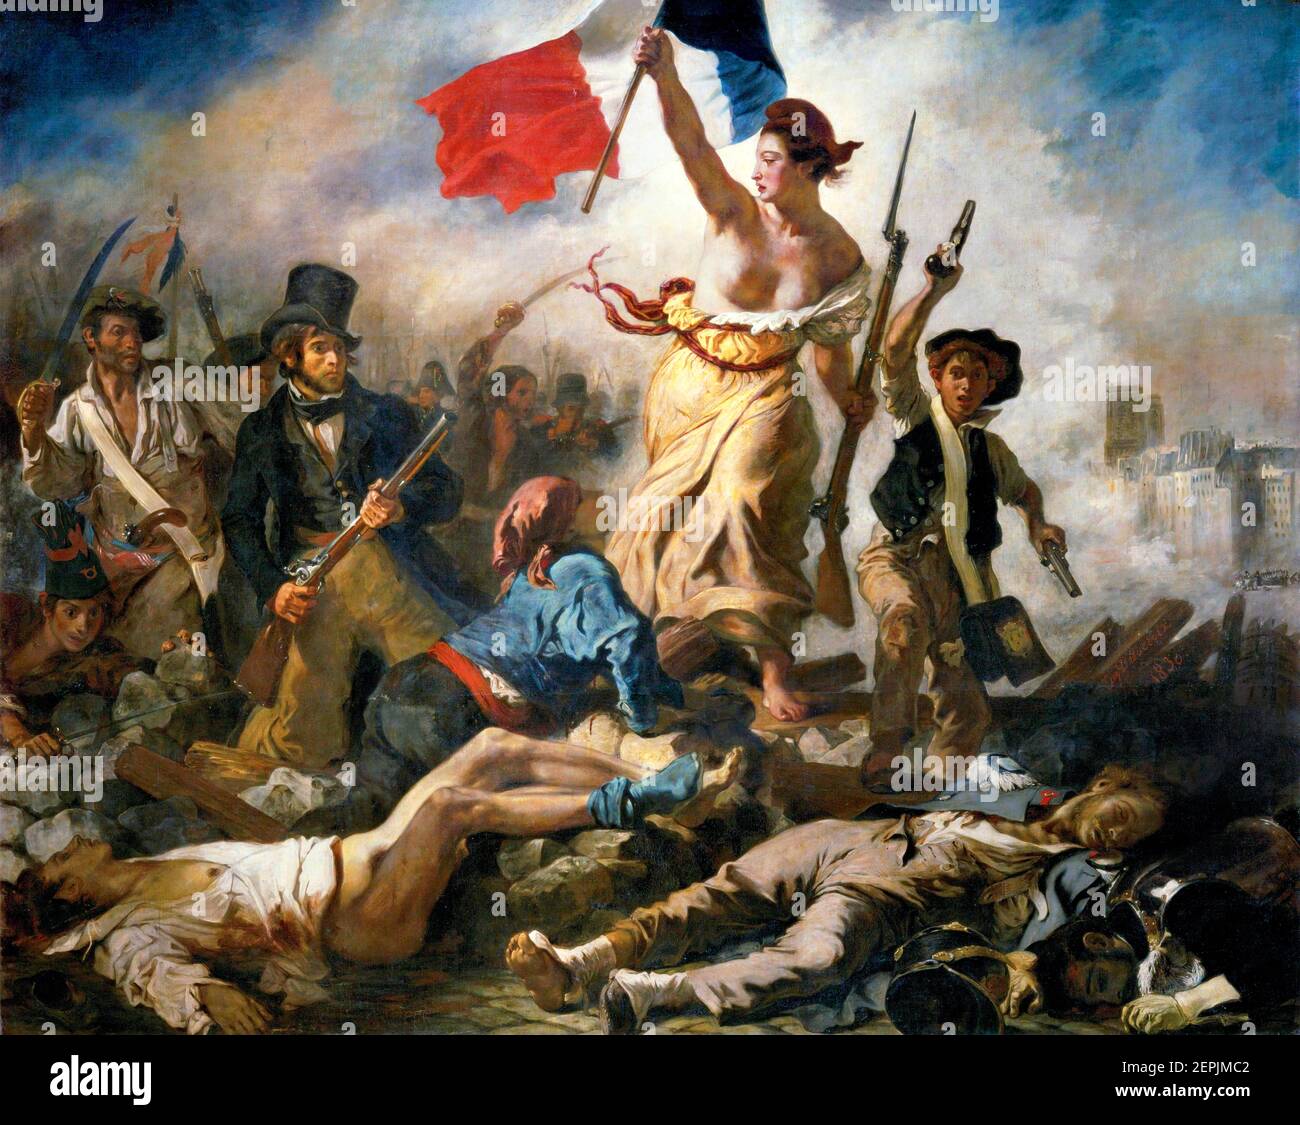 Top 97+ Images what event inspired liberty leading the people by eugène delacroix? Stunning